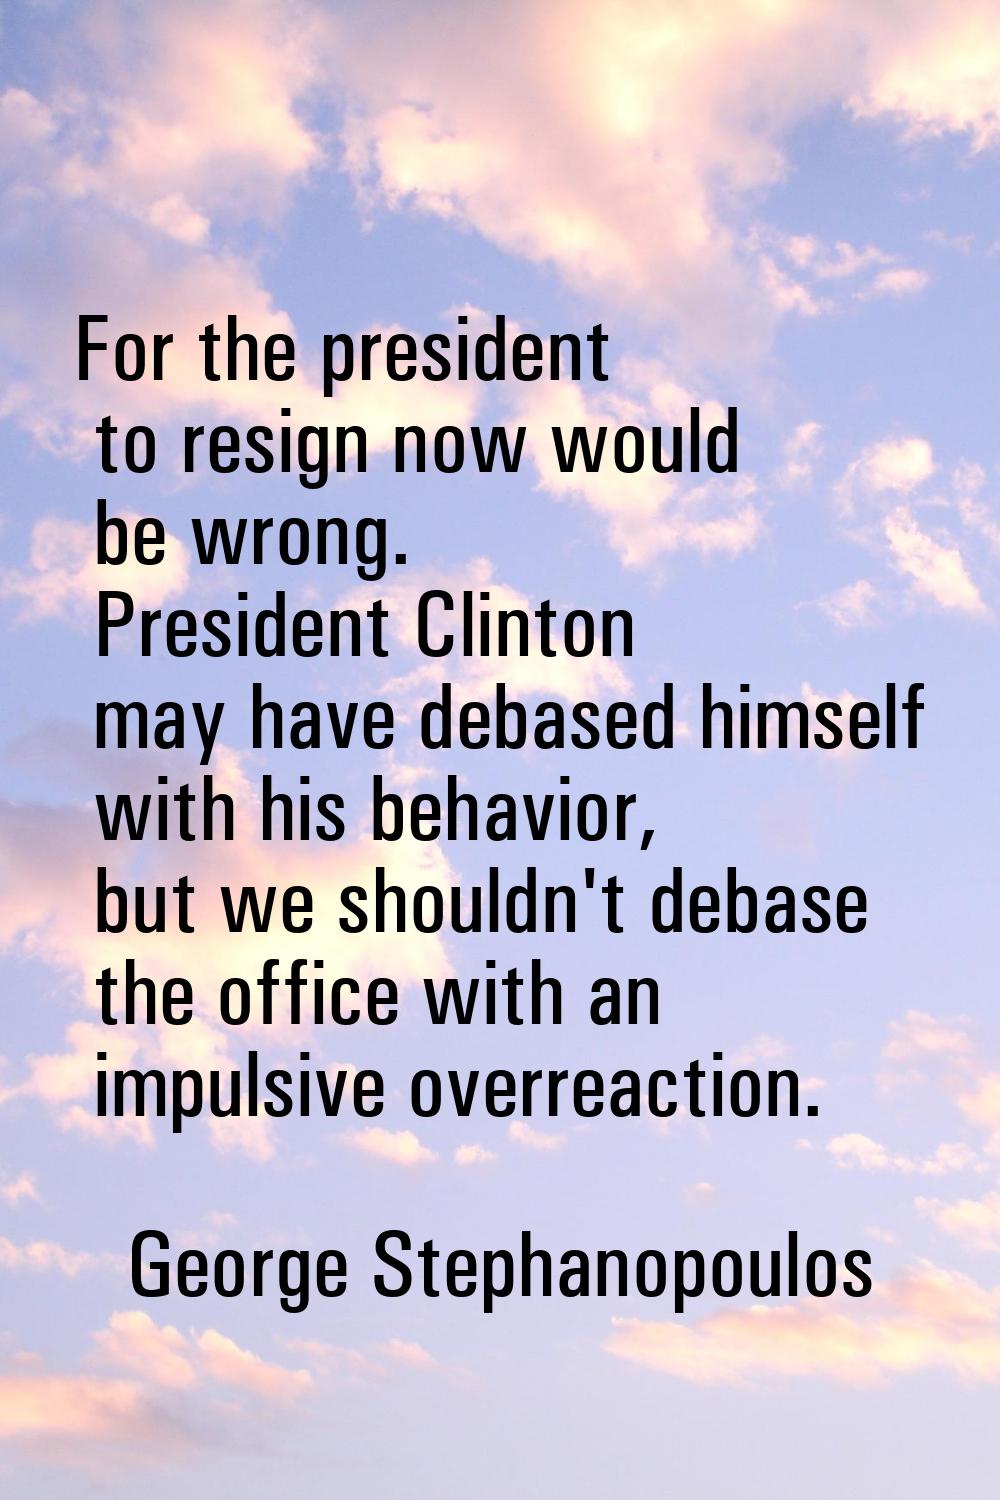 For the president to resign now would be wrong. President Clinton may have debased himself with his